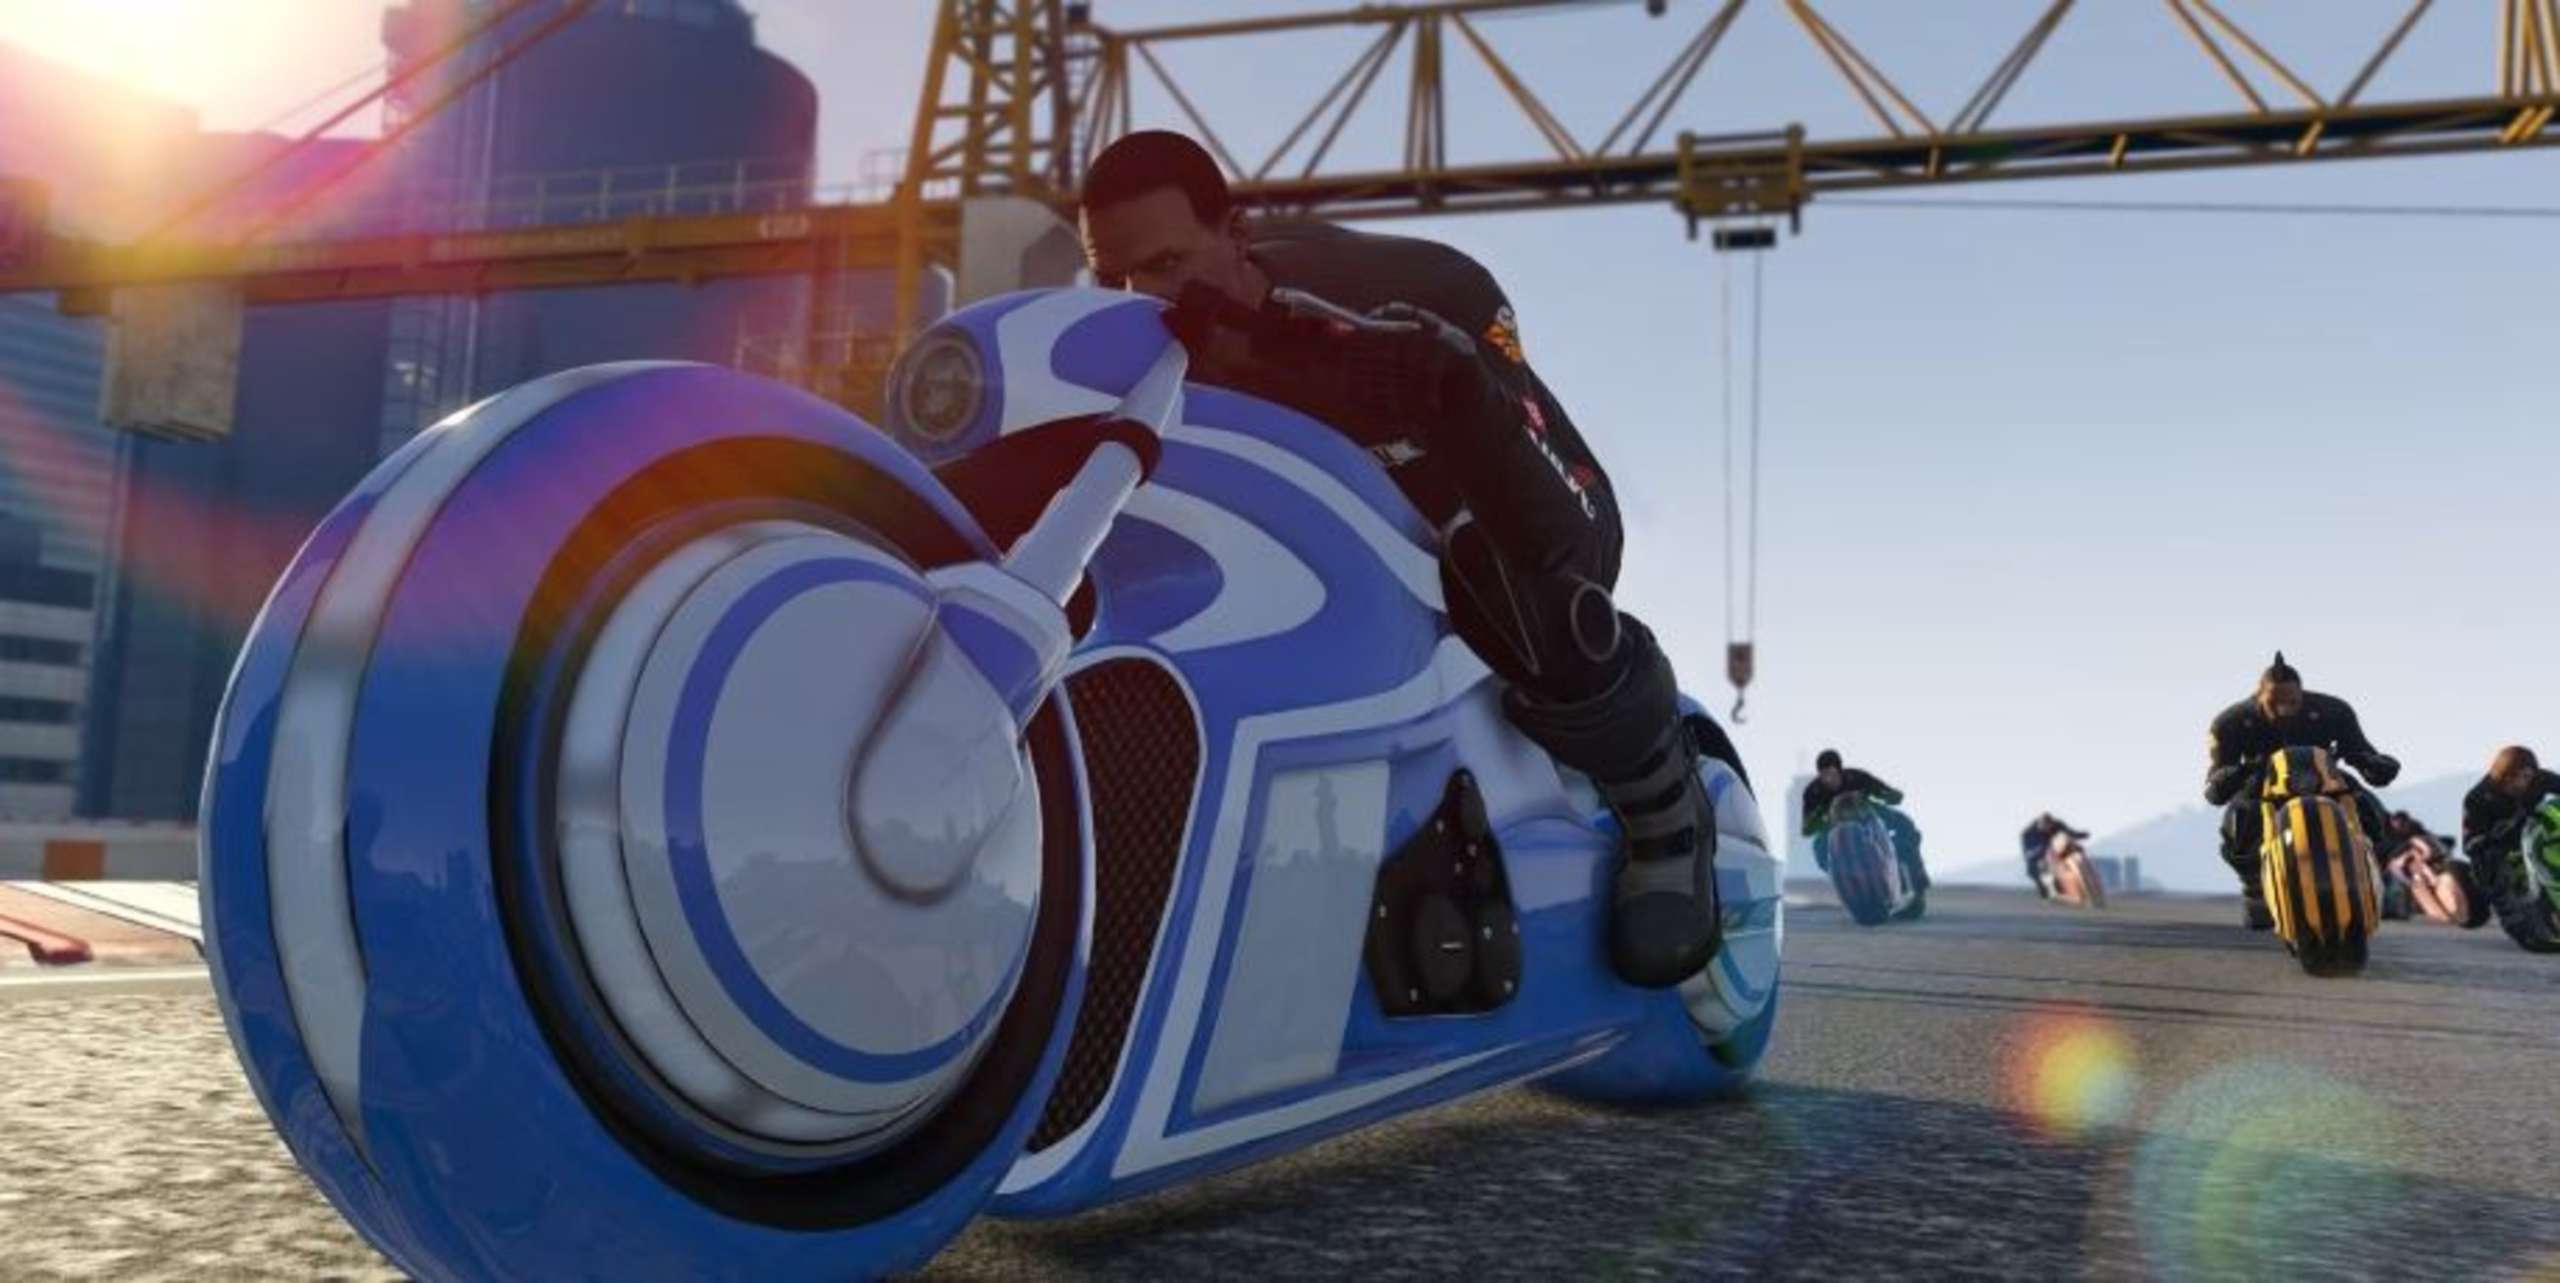 A GTA Online Player Asks For Their Bike To Be Dropped Off Nearby, Only To Find It Has Been Placed In An Inconvenient And Out-Of-The-Way Location